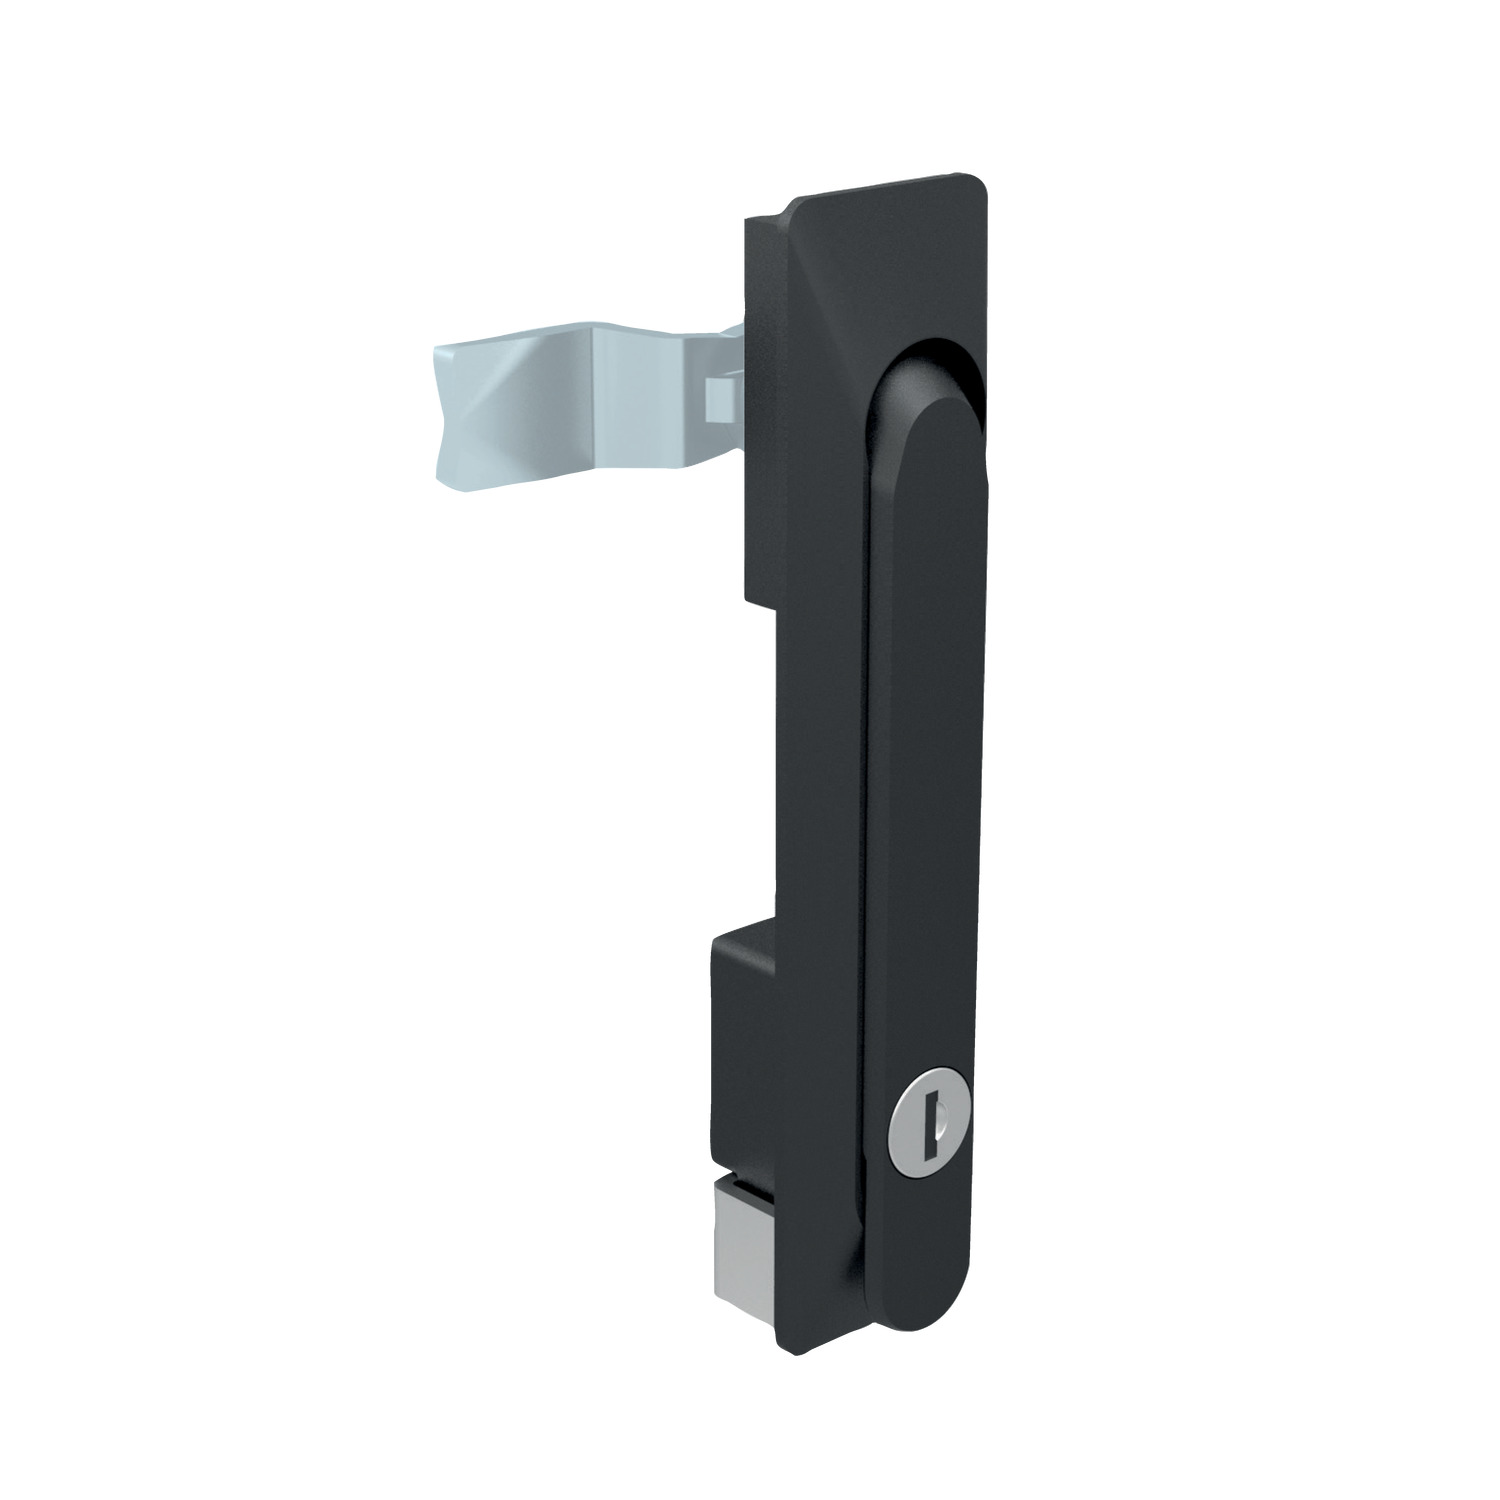 Swing Handles - Cam Control For attractive, easy functional opening for telecom and data cabinets as well as other industrial enclosures. Lock and handle in one attractive design.